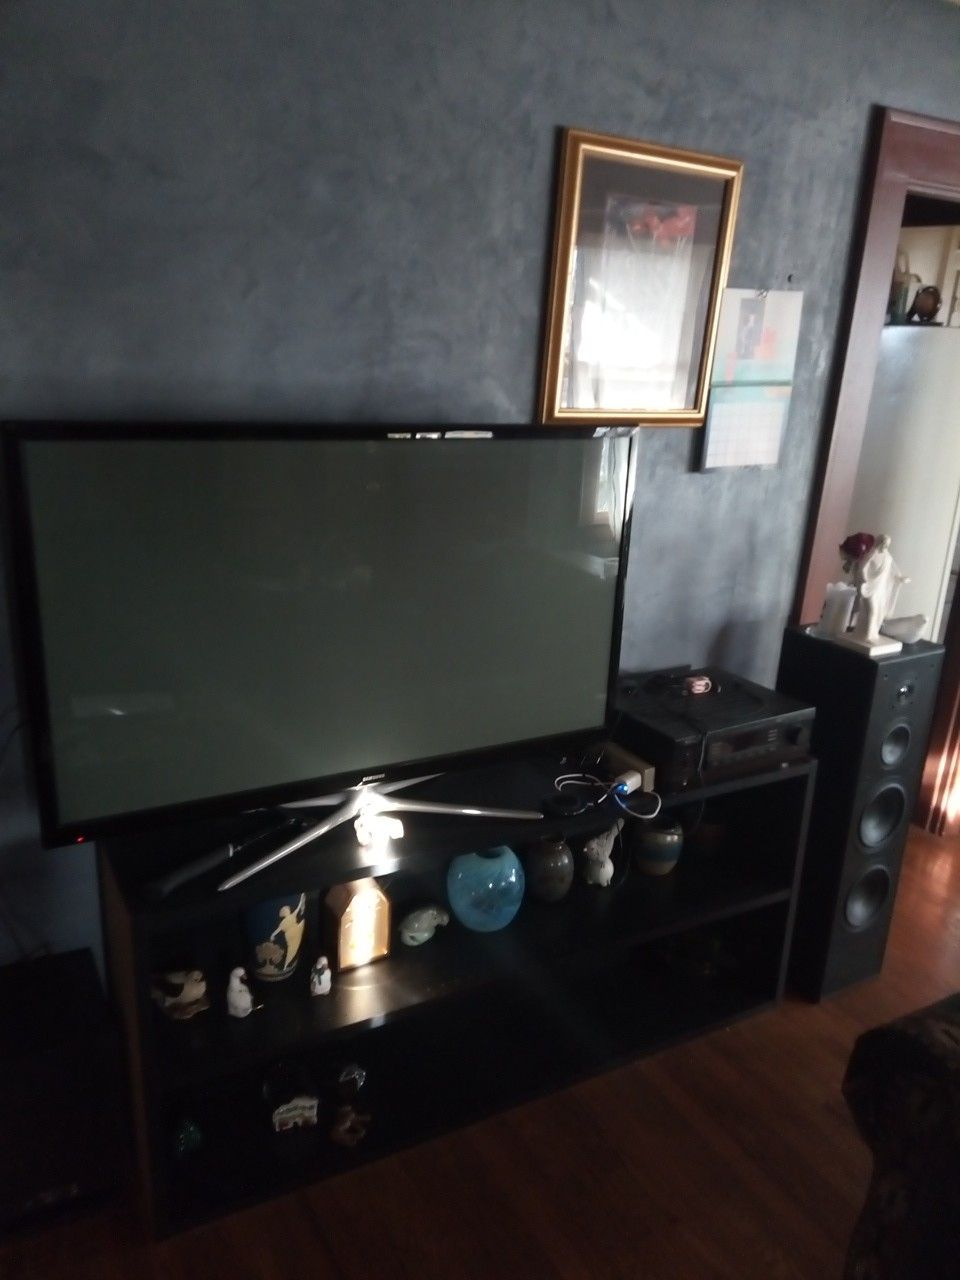 Samsung 51inch plasma flat screen for sale steal of a deal.